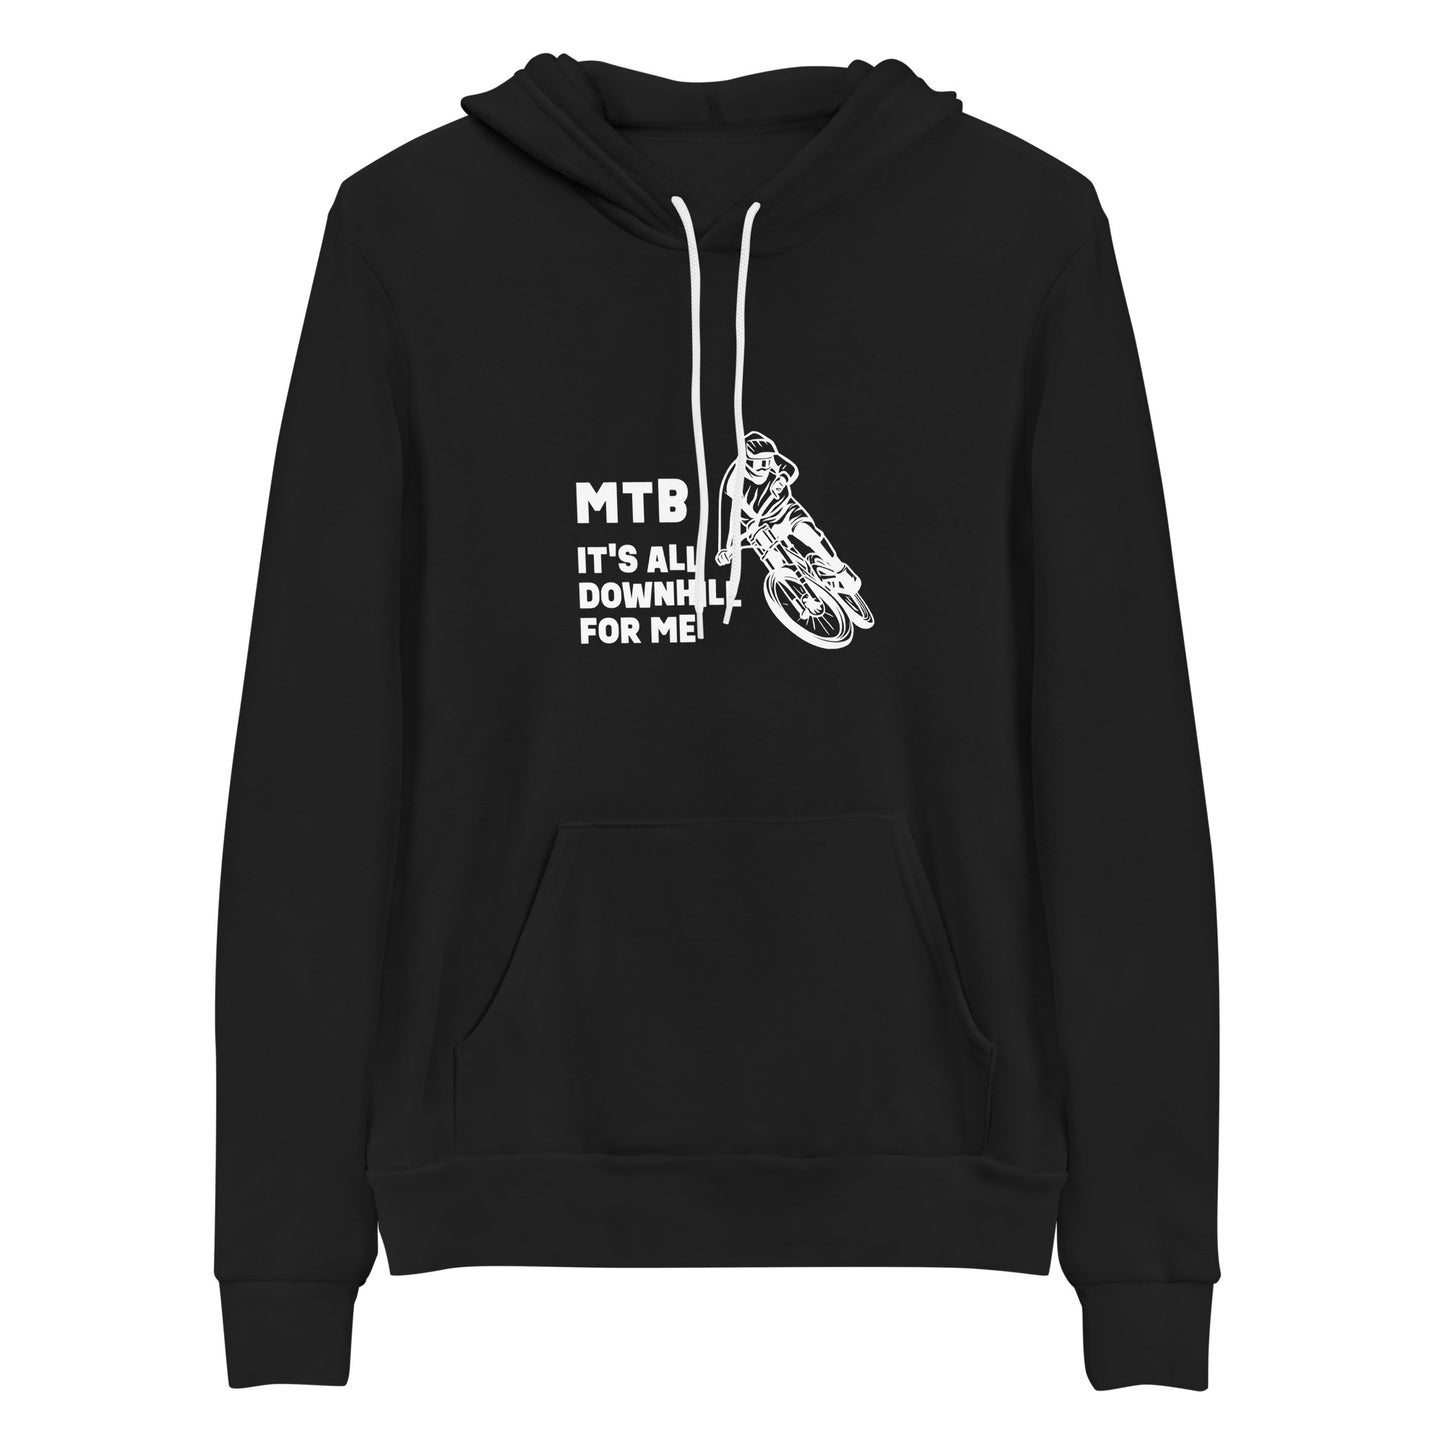 It's All Downhill (white) - Unisex hoodie